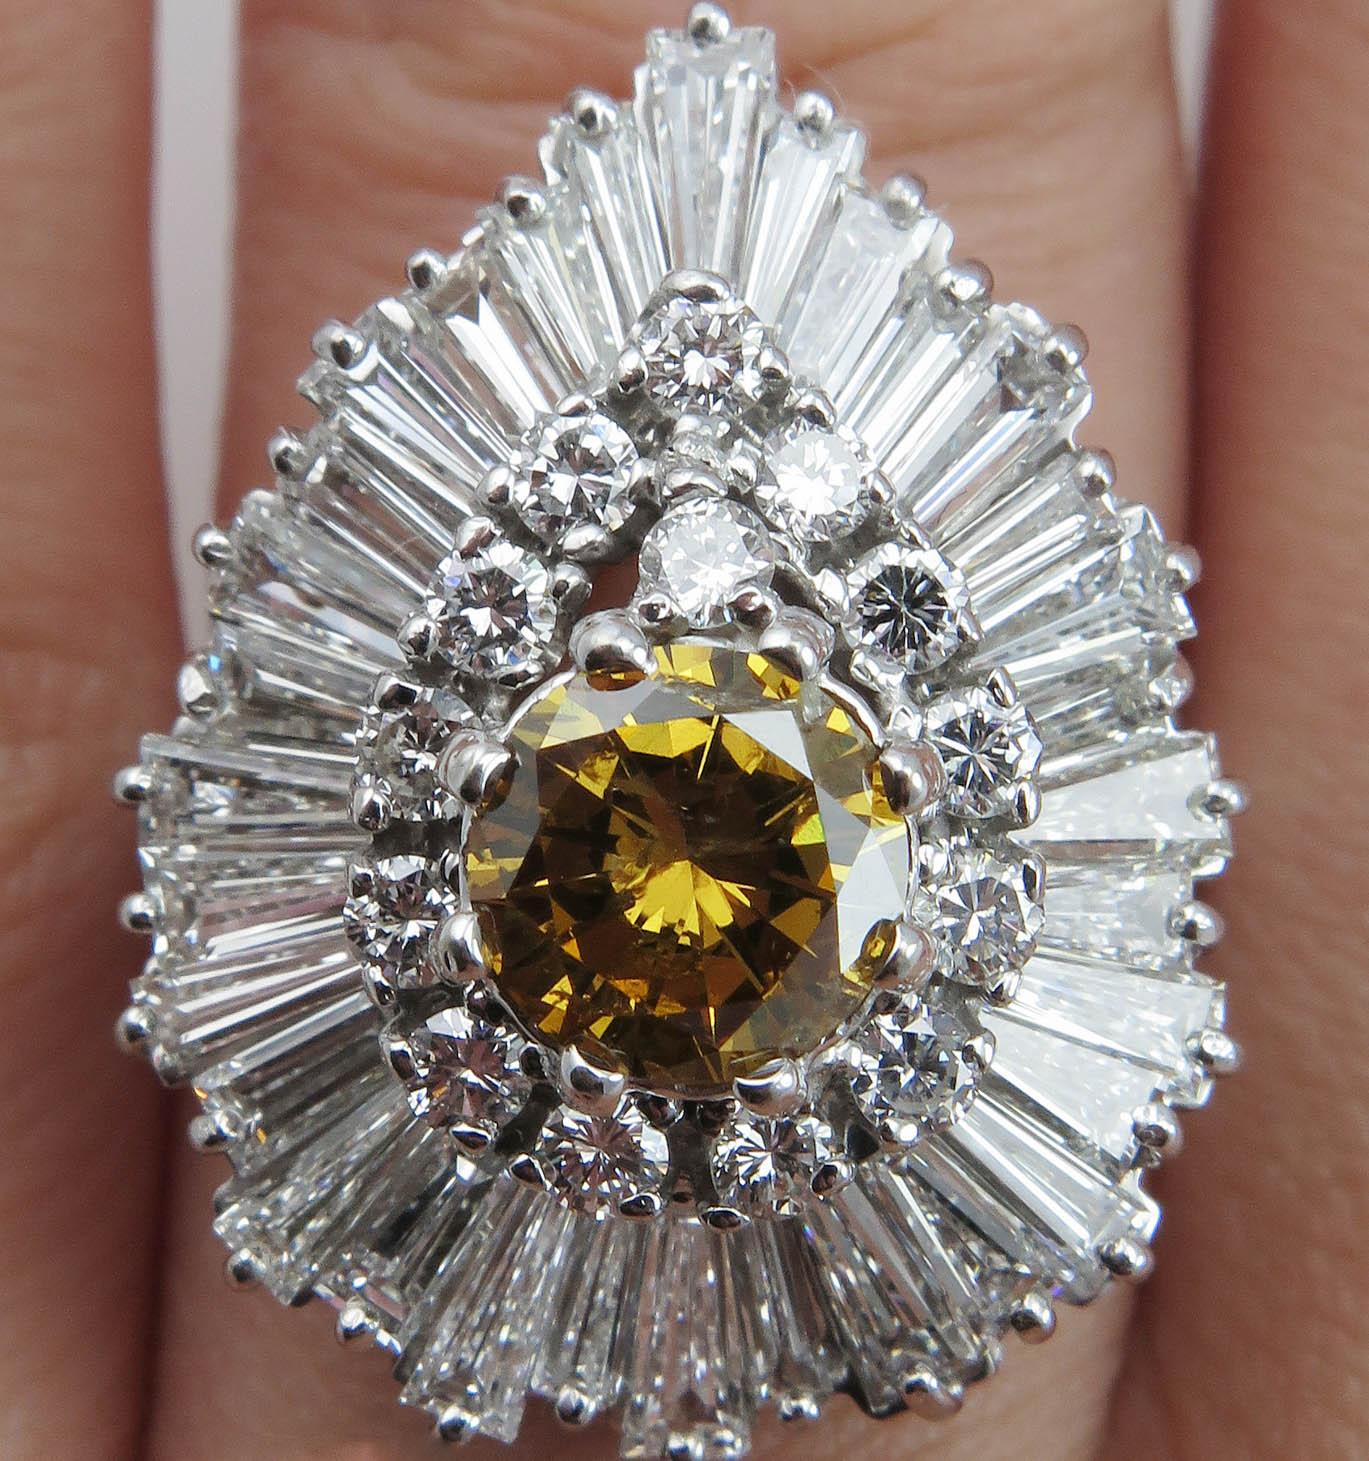 A Gorgeous Timeless Retro CIRCA 1950s 18k White Gold (stamped) Pear Shaped Ballerina Diamond Ring!!
The Center Stone is GIA Certified 1.08ct Round Diamond in NATURAL Fancy Deep Brownish Yellow color, SI2 clarity (Eye Clear). The measurements of the